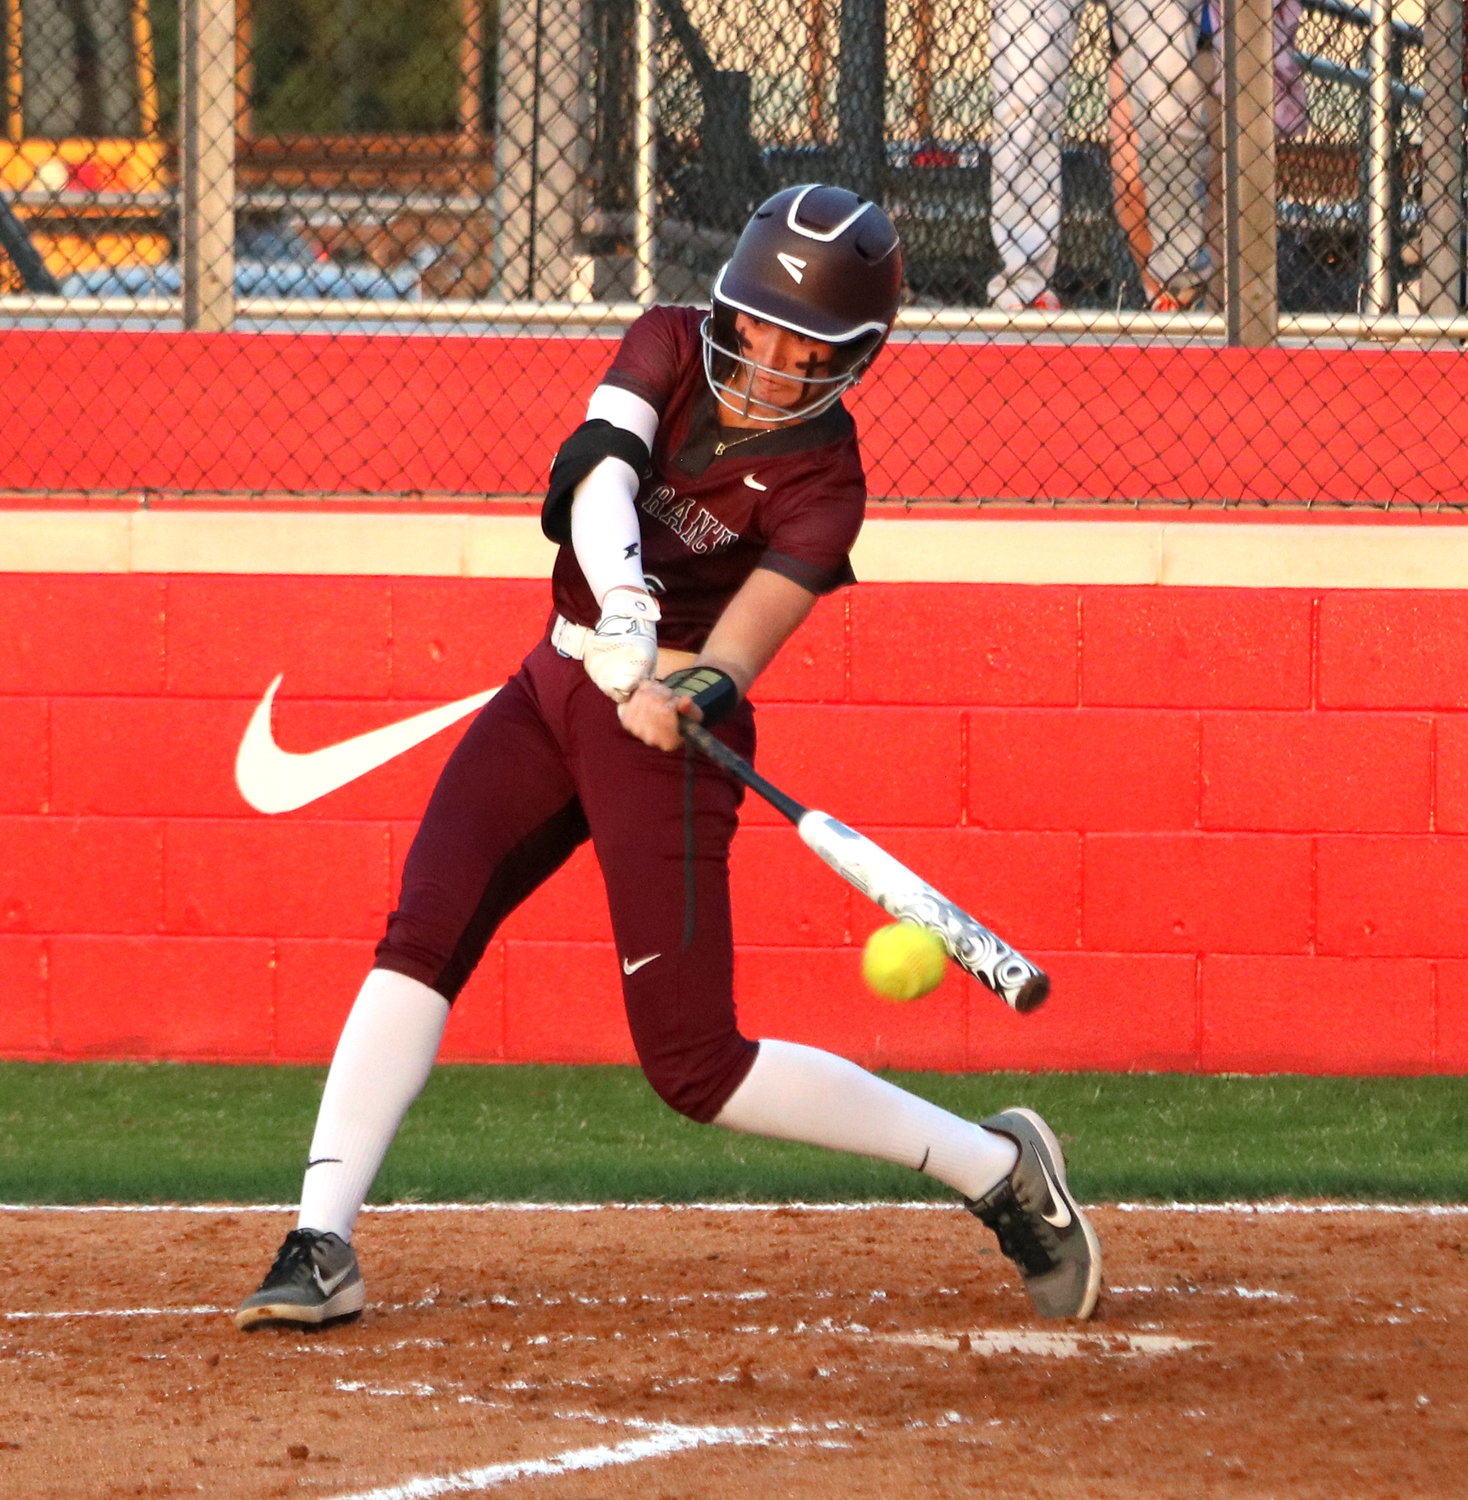 Faith Piper hits during Friday's District 19-6A game between Katy and Cinco Ranch at the Katy softball field.